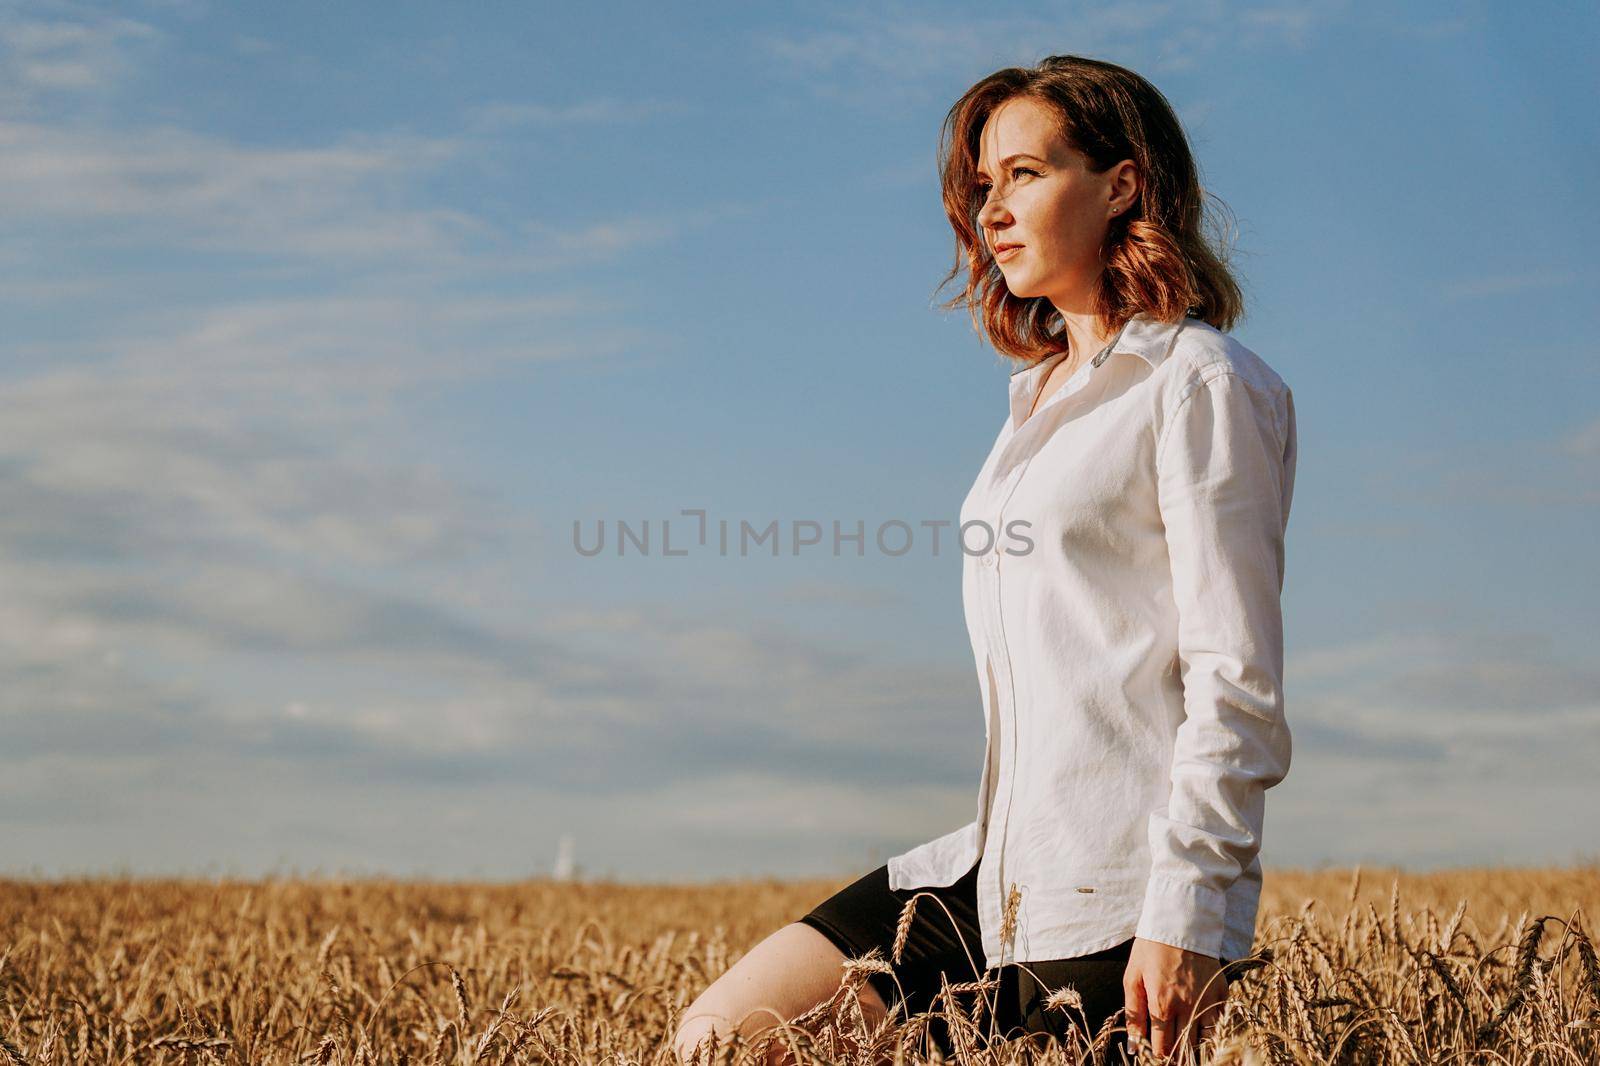 Happy young woman in a white shirt in a wheat field. Sunny day. Girl smiling, happiness concept